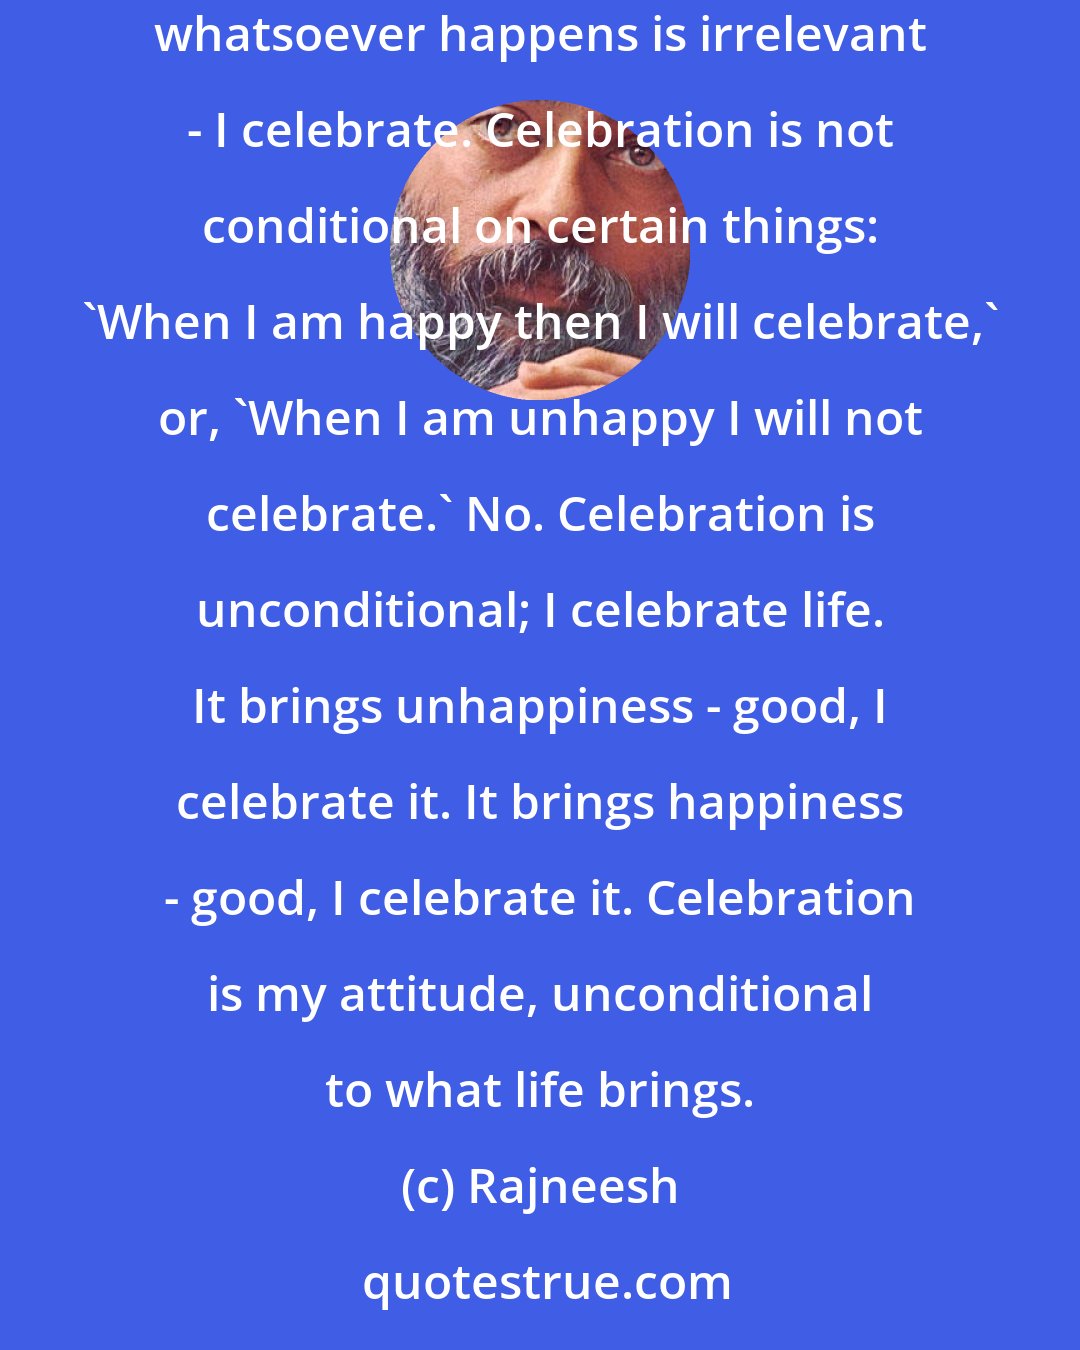 Rajneesh: To me, life in its totality is good. And when you understand life in its totality, only then can you celebrate; otherwise not. Celebration means: whatsoever happens is irrelevant - I celebrate. Celebration is not conditional on certain things: 'When I am happy then I will celebrate,' or, 'When I am unhappy I will not celebrate.' No. Celebration is unconditional; I celebrate life. It brings unhappiness - good, I celebrate it. It brings happiness - good, I celebrate it. Celebration is my attitude, unconditional to what life brings.